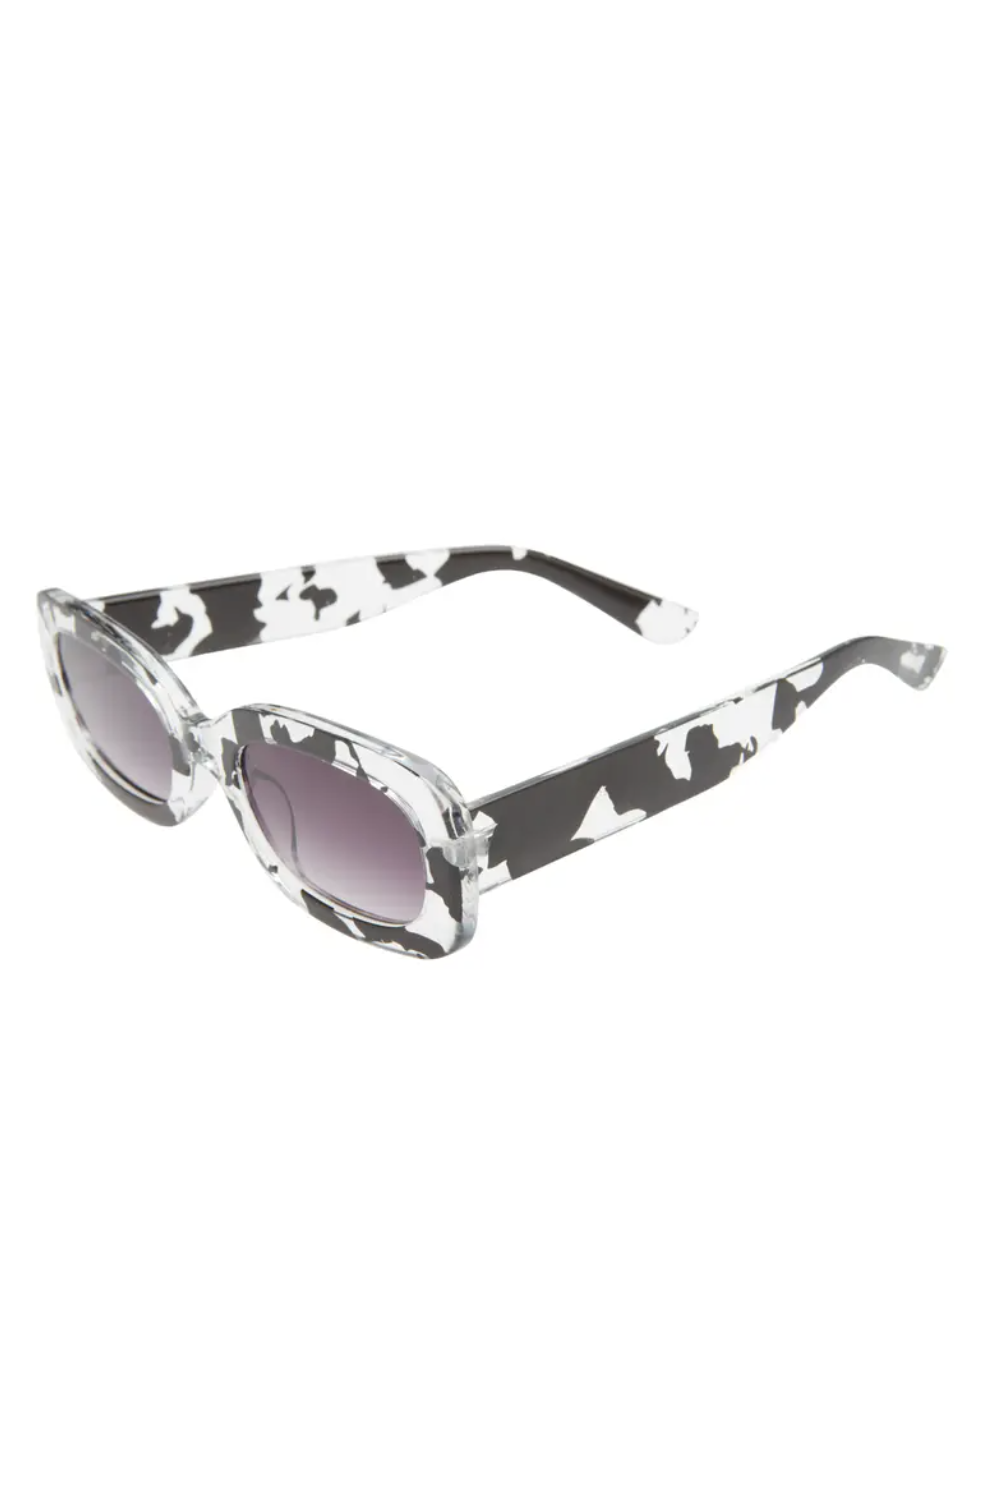 the black and white cow print glasses